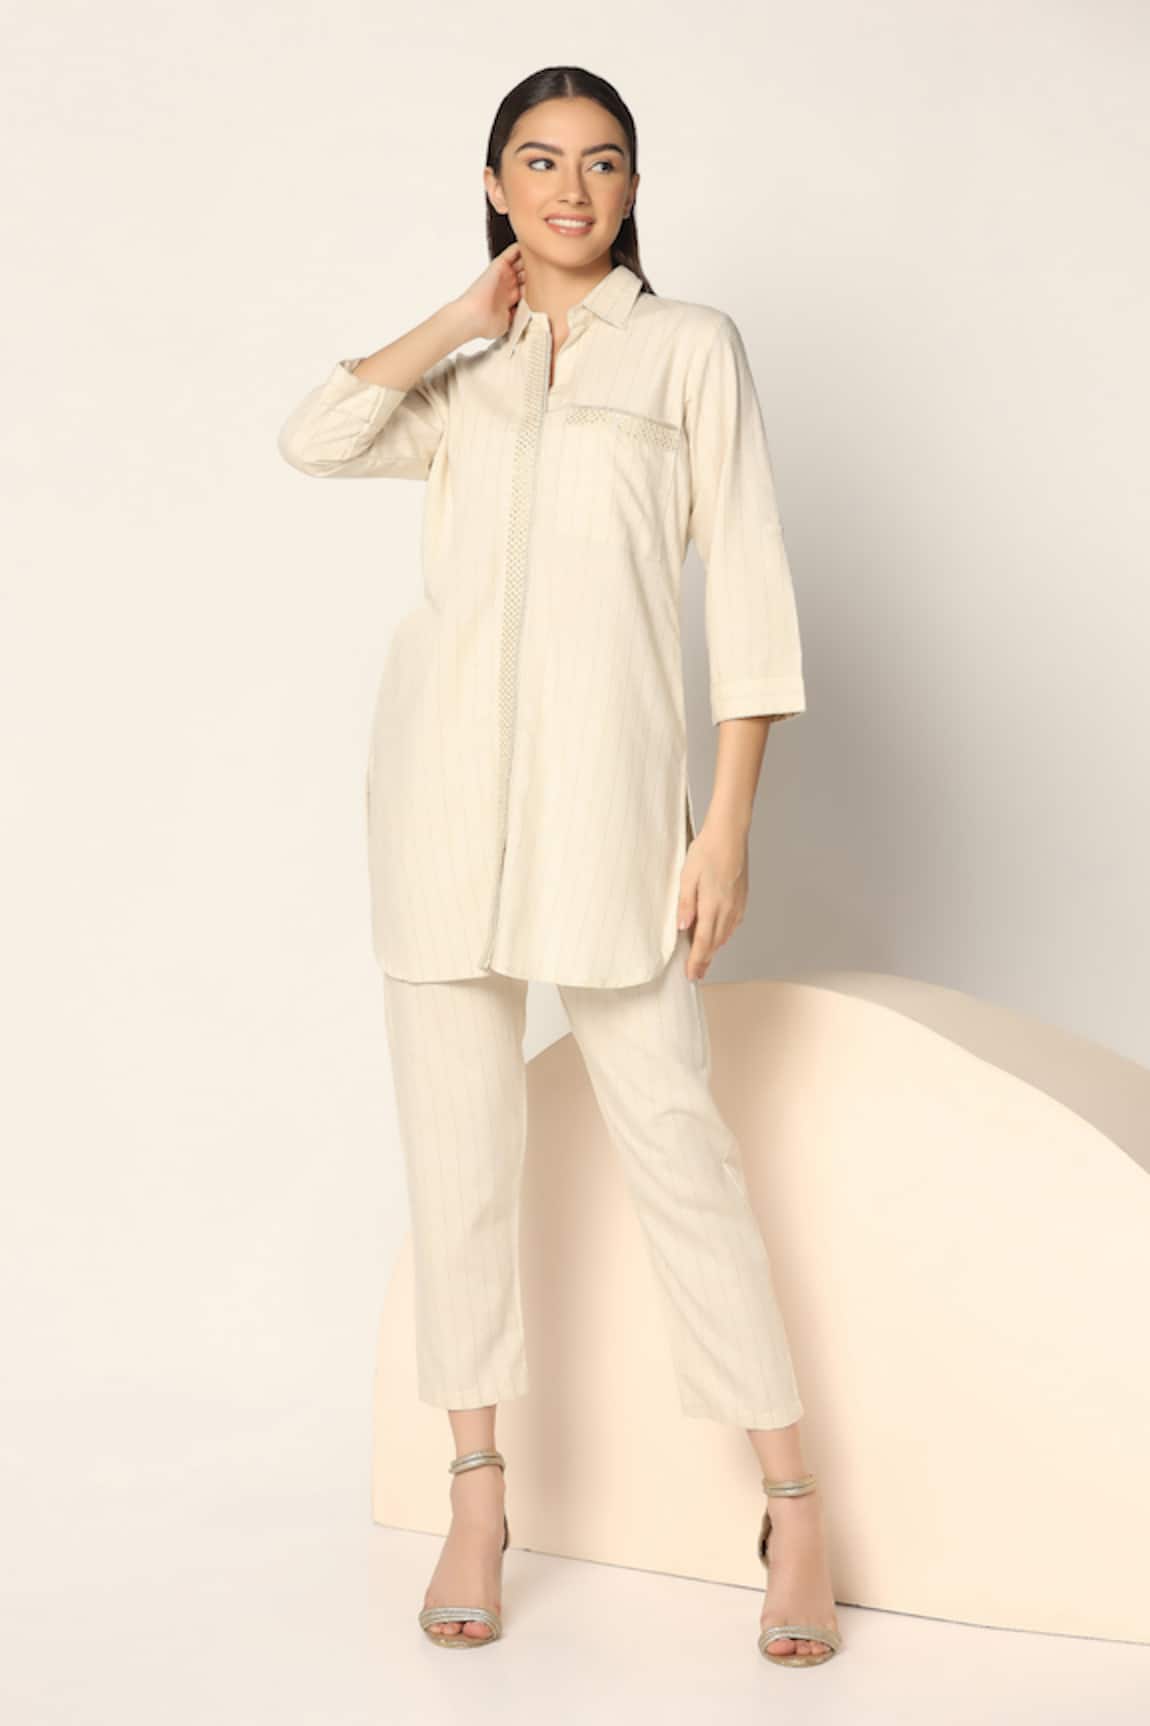 Two Sisters By Gyans Thread Embroidered Shirt & Pant Set